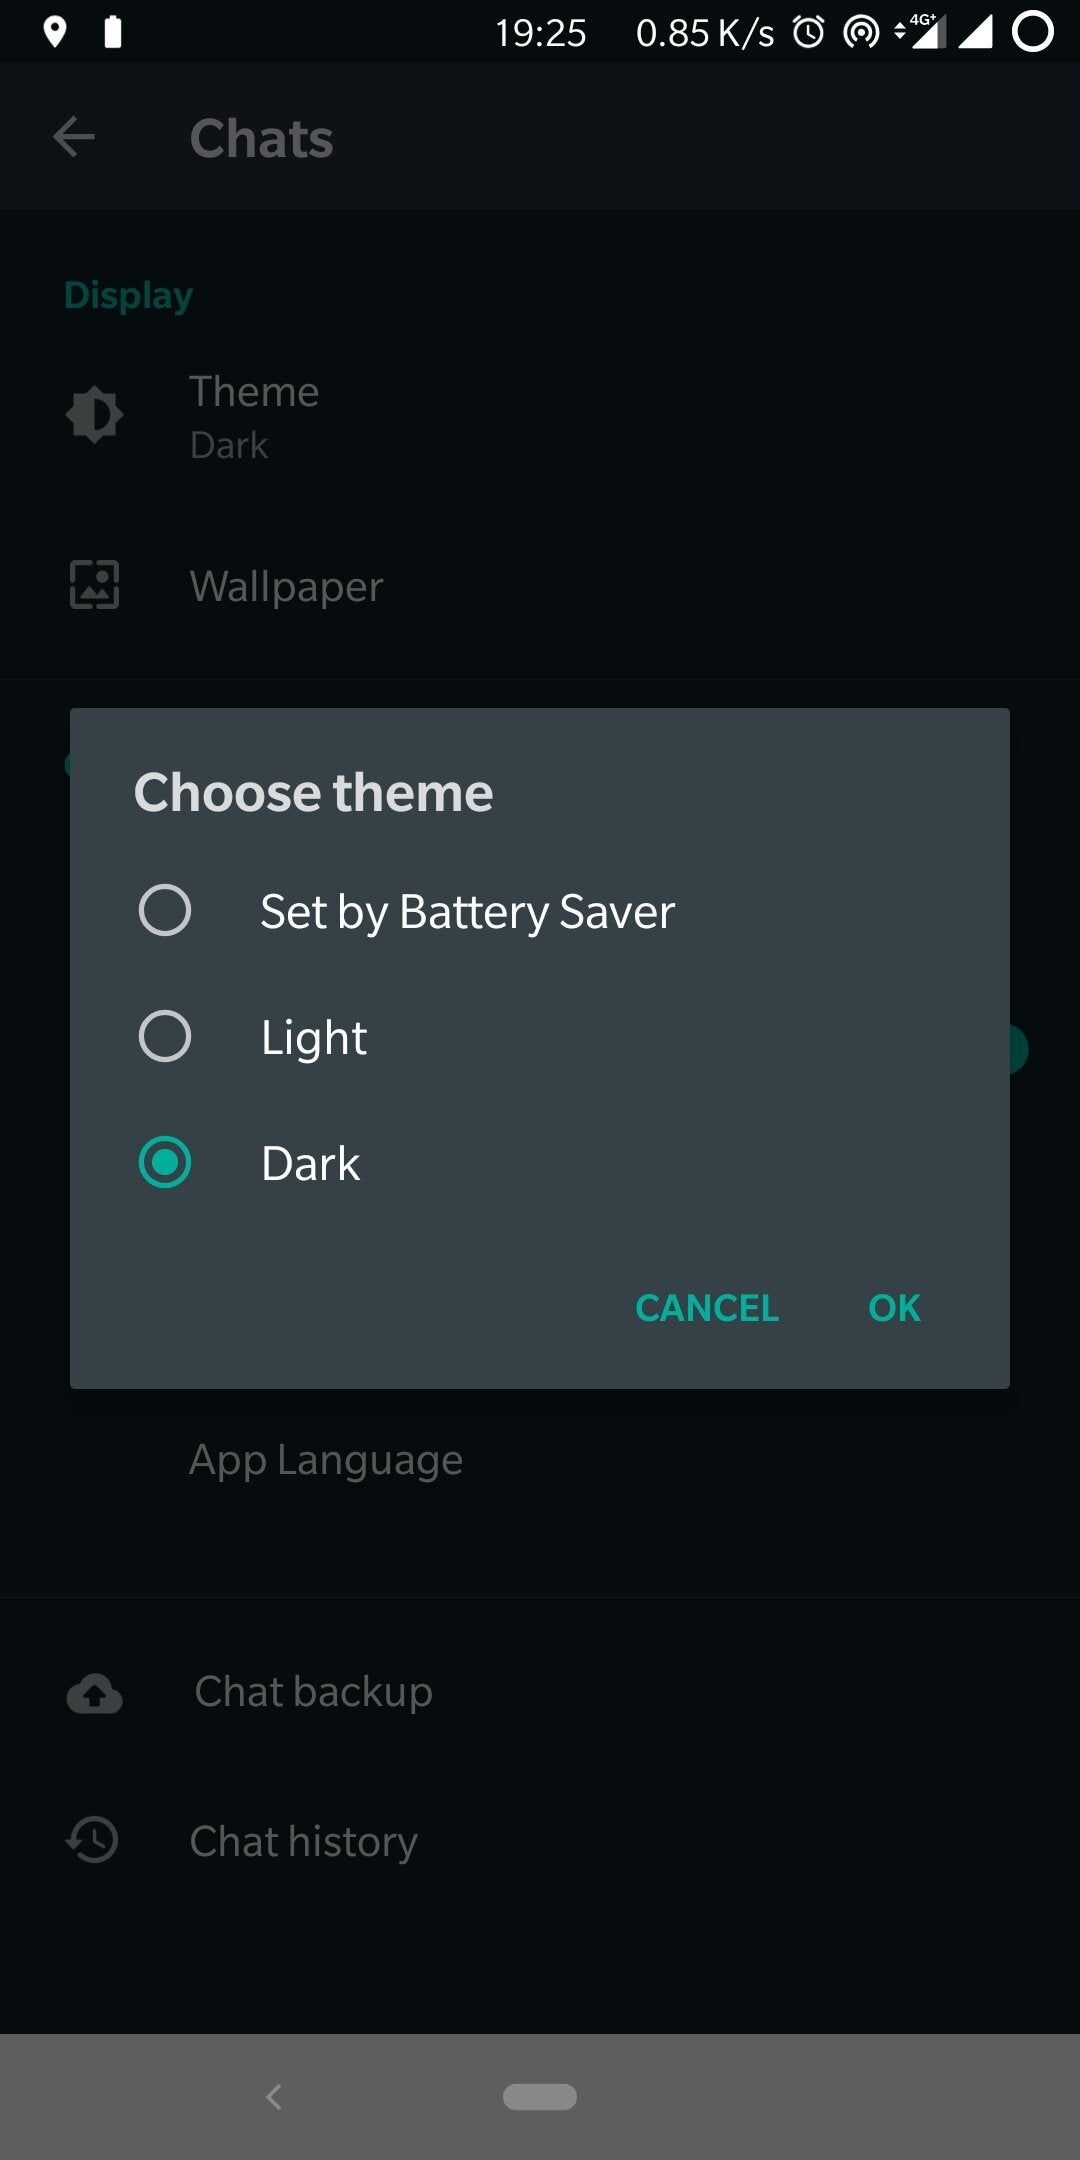 WhatsApp for Android dark theme - WhatsApp is rolling out dark mode to beta users on Android